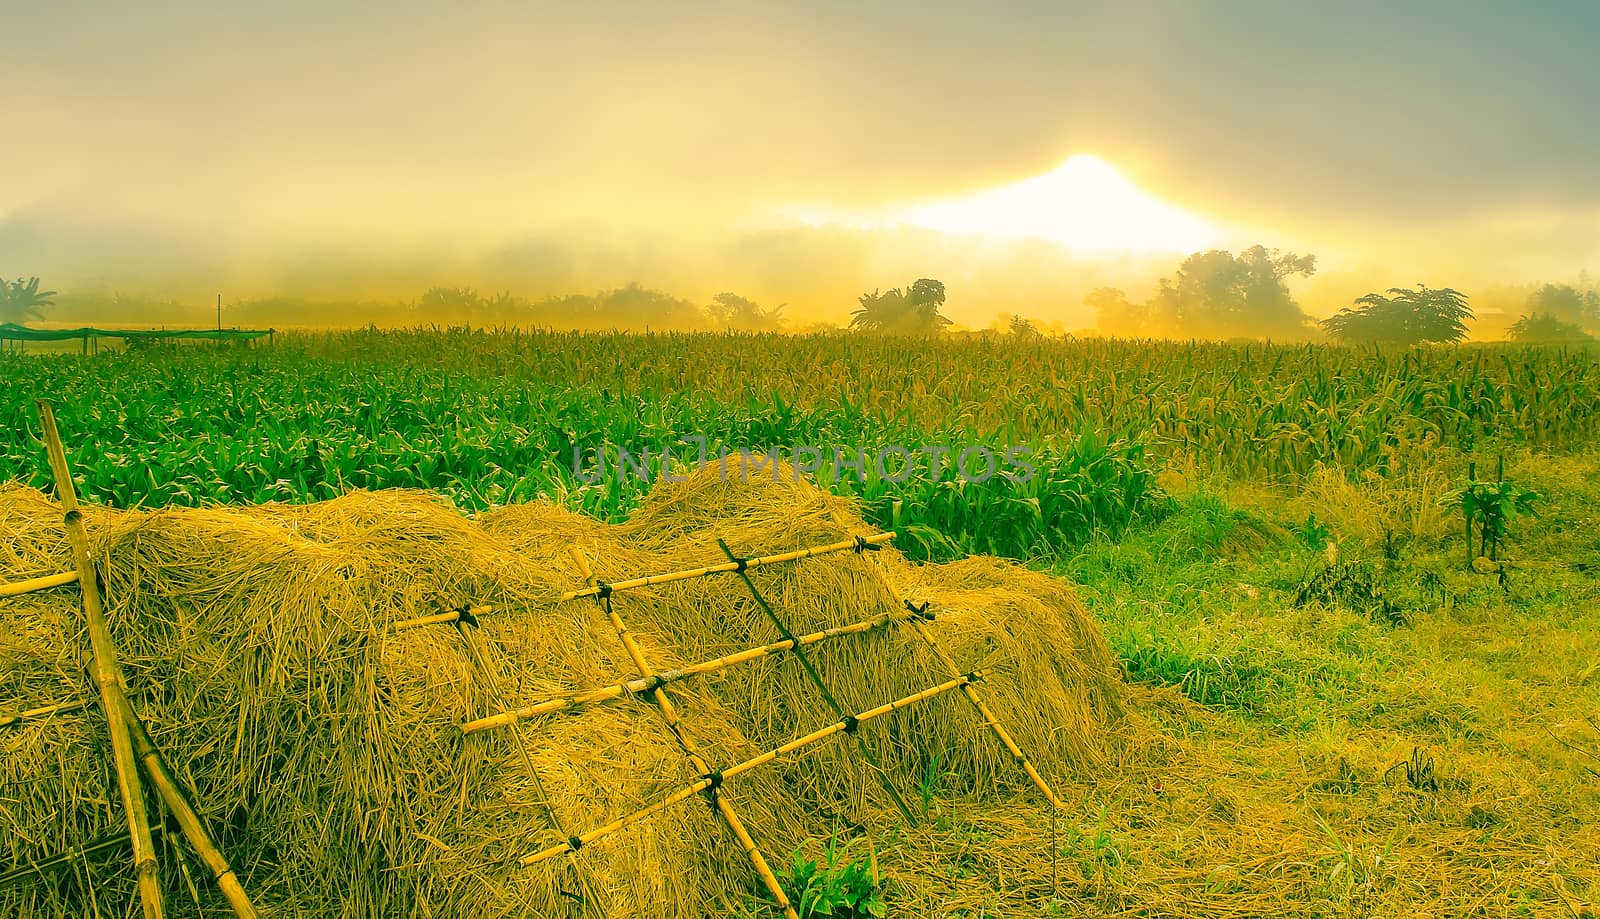 The landscape scene of field with sunrise in the morning.